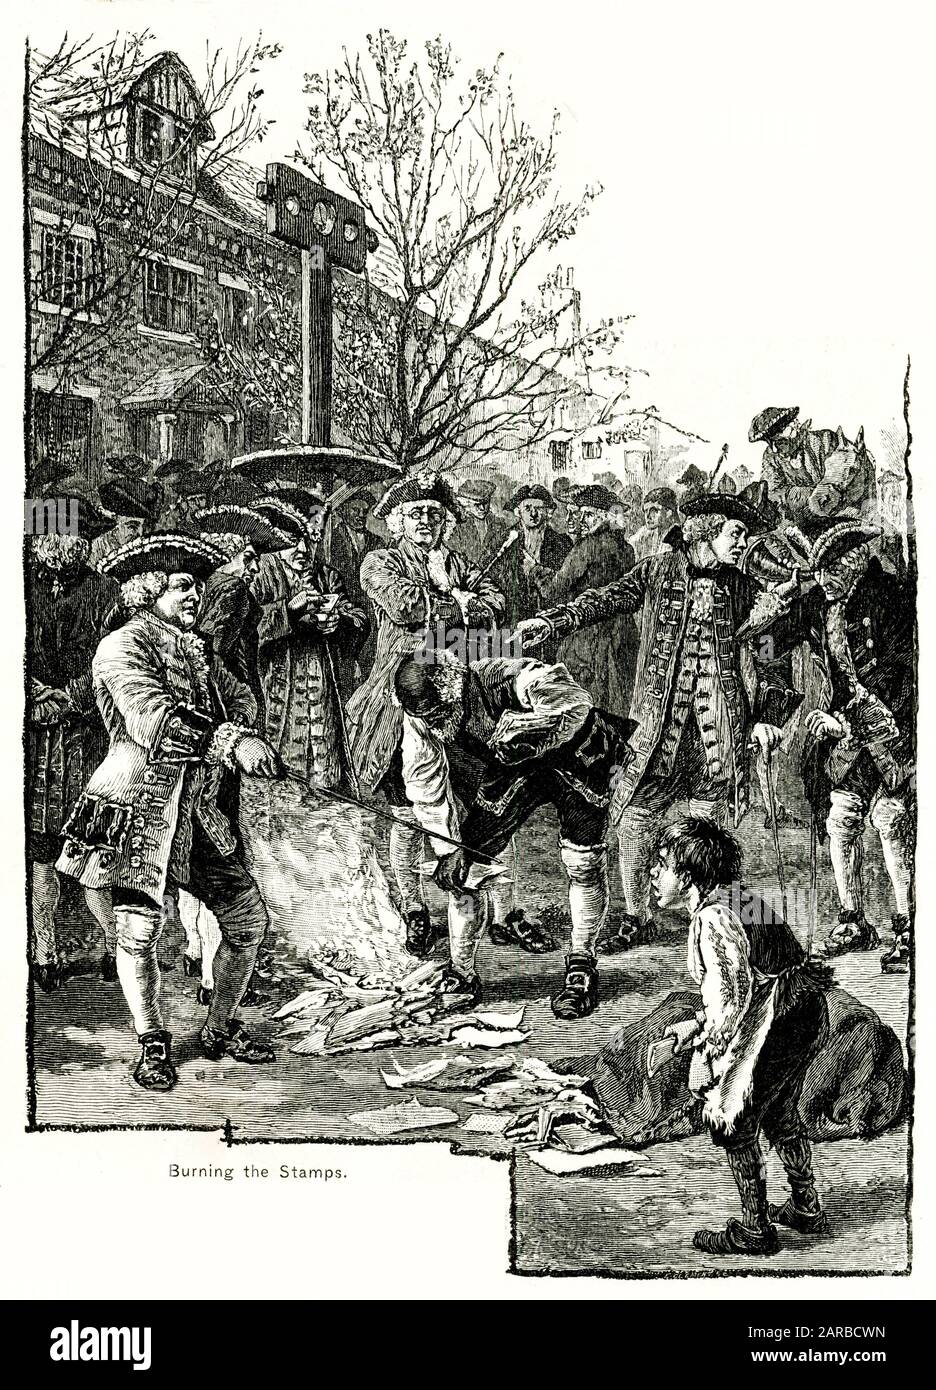 American Colonists burn papers bearing the Stamps required under The Stamp Act of March 22, 1765. The new tax was imposed on all American colonists and required them to pay a tax on every piece of printed paper they used. Ship's papers, legal documents, licenses, newspapers, other publications, and even playing cards were taxed. This act was highly unpopular as this print shows.     Date: 1766 Stock Photo